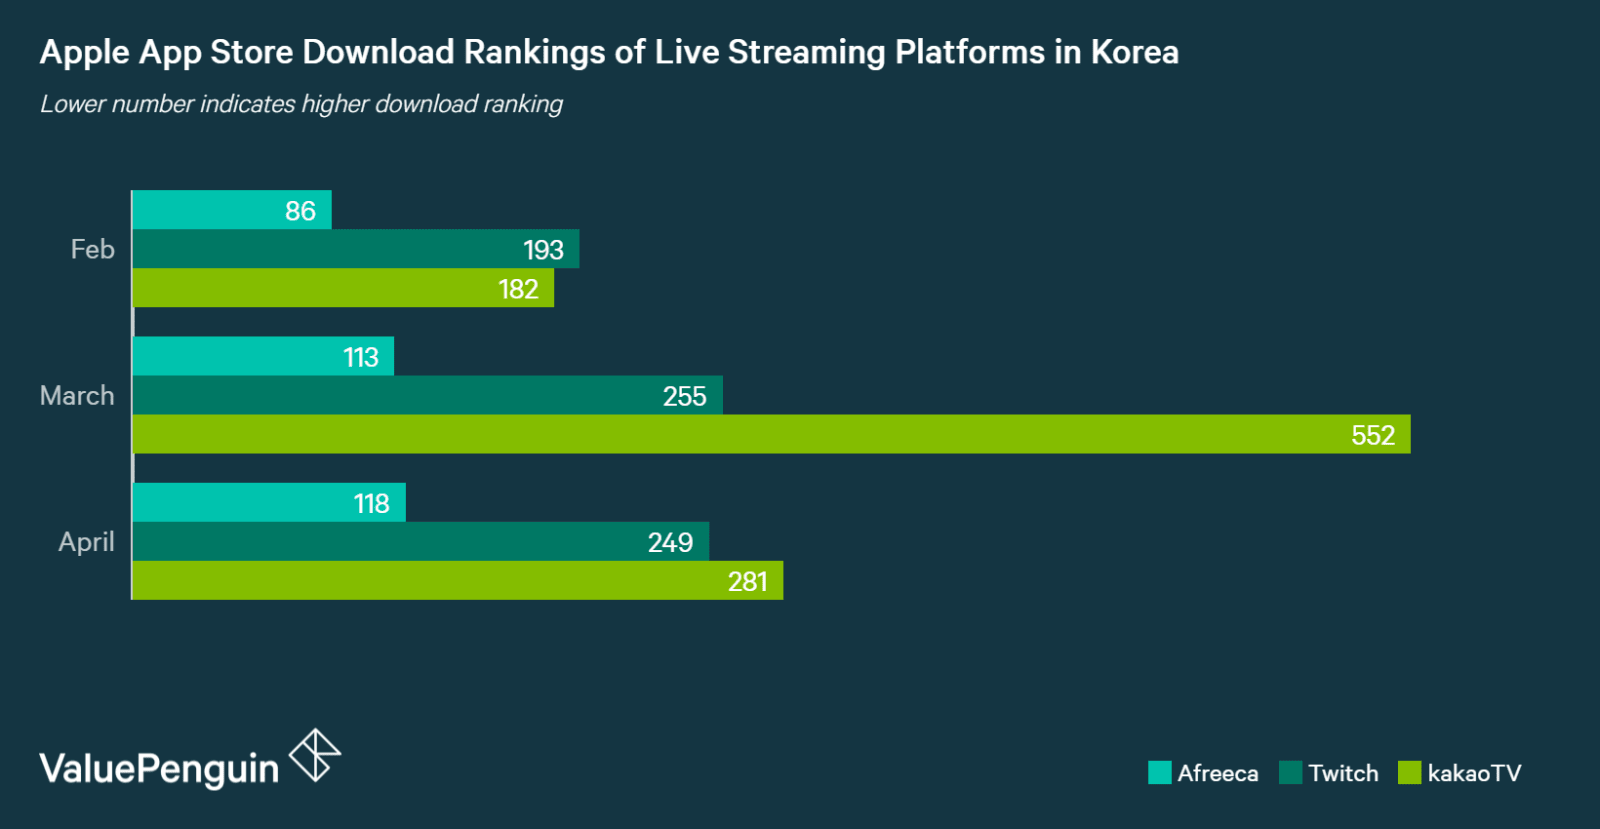 Apple App store download rankings of leading live-streaming apps in Korea: KakaoLive, AfreecaTV and Twitch